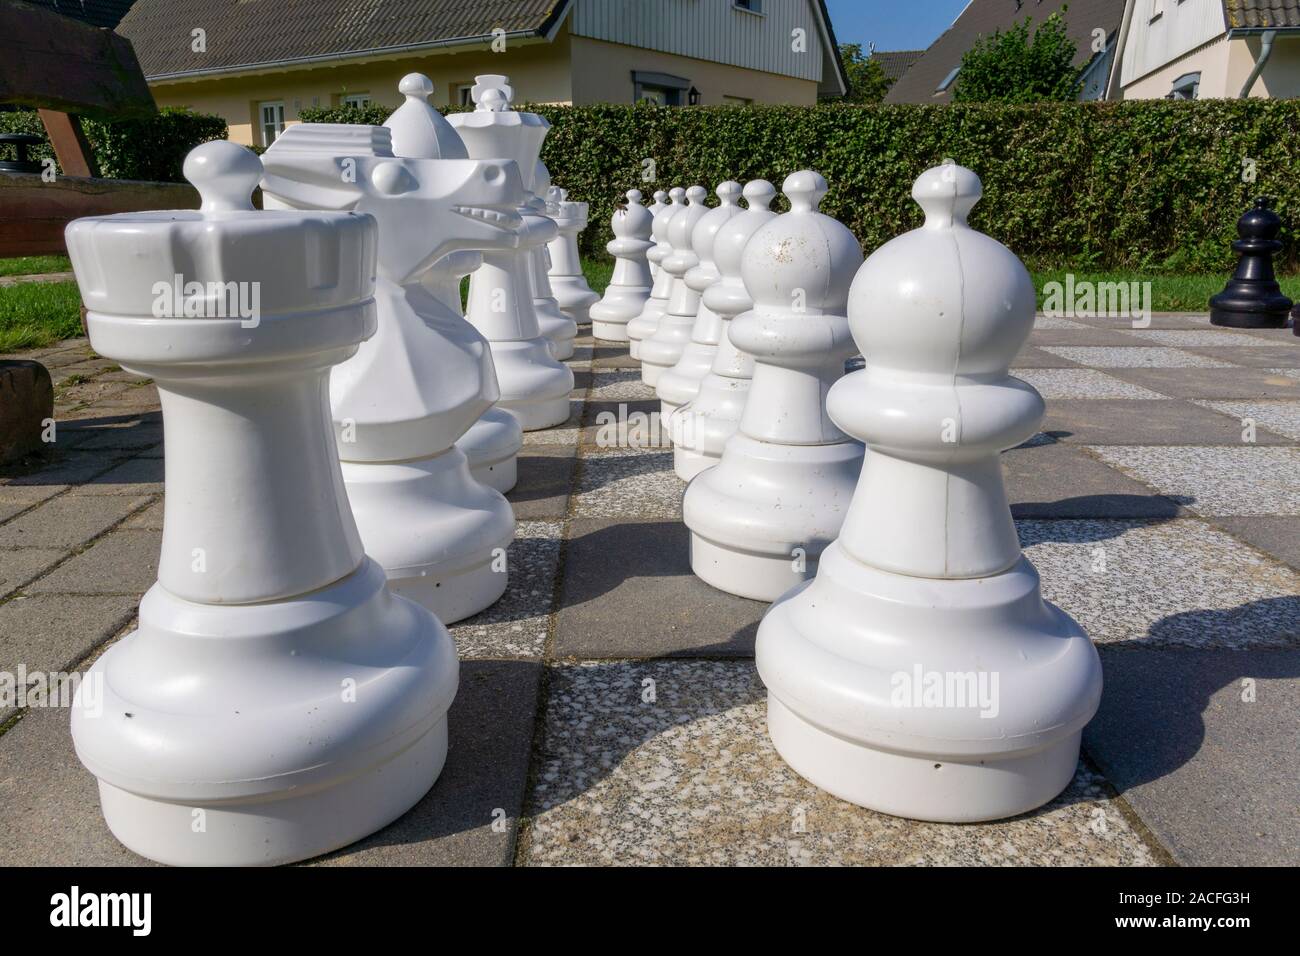 cyber punk chess pieces.. - Playground